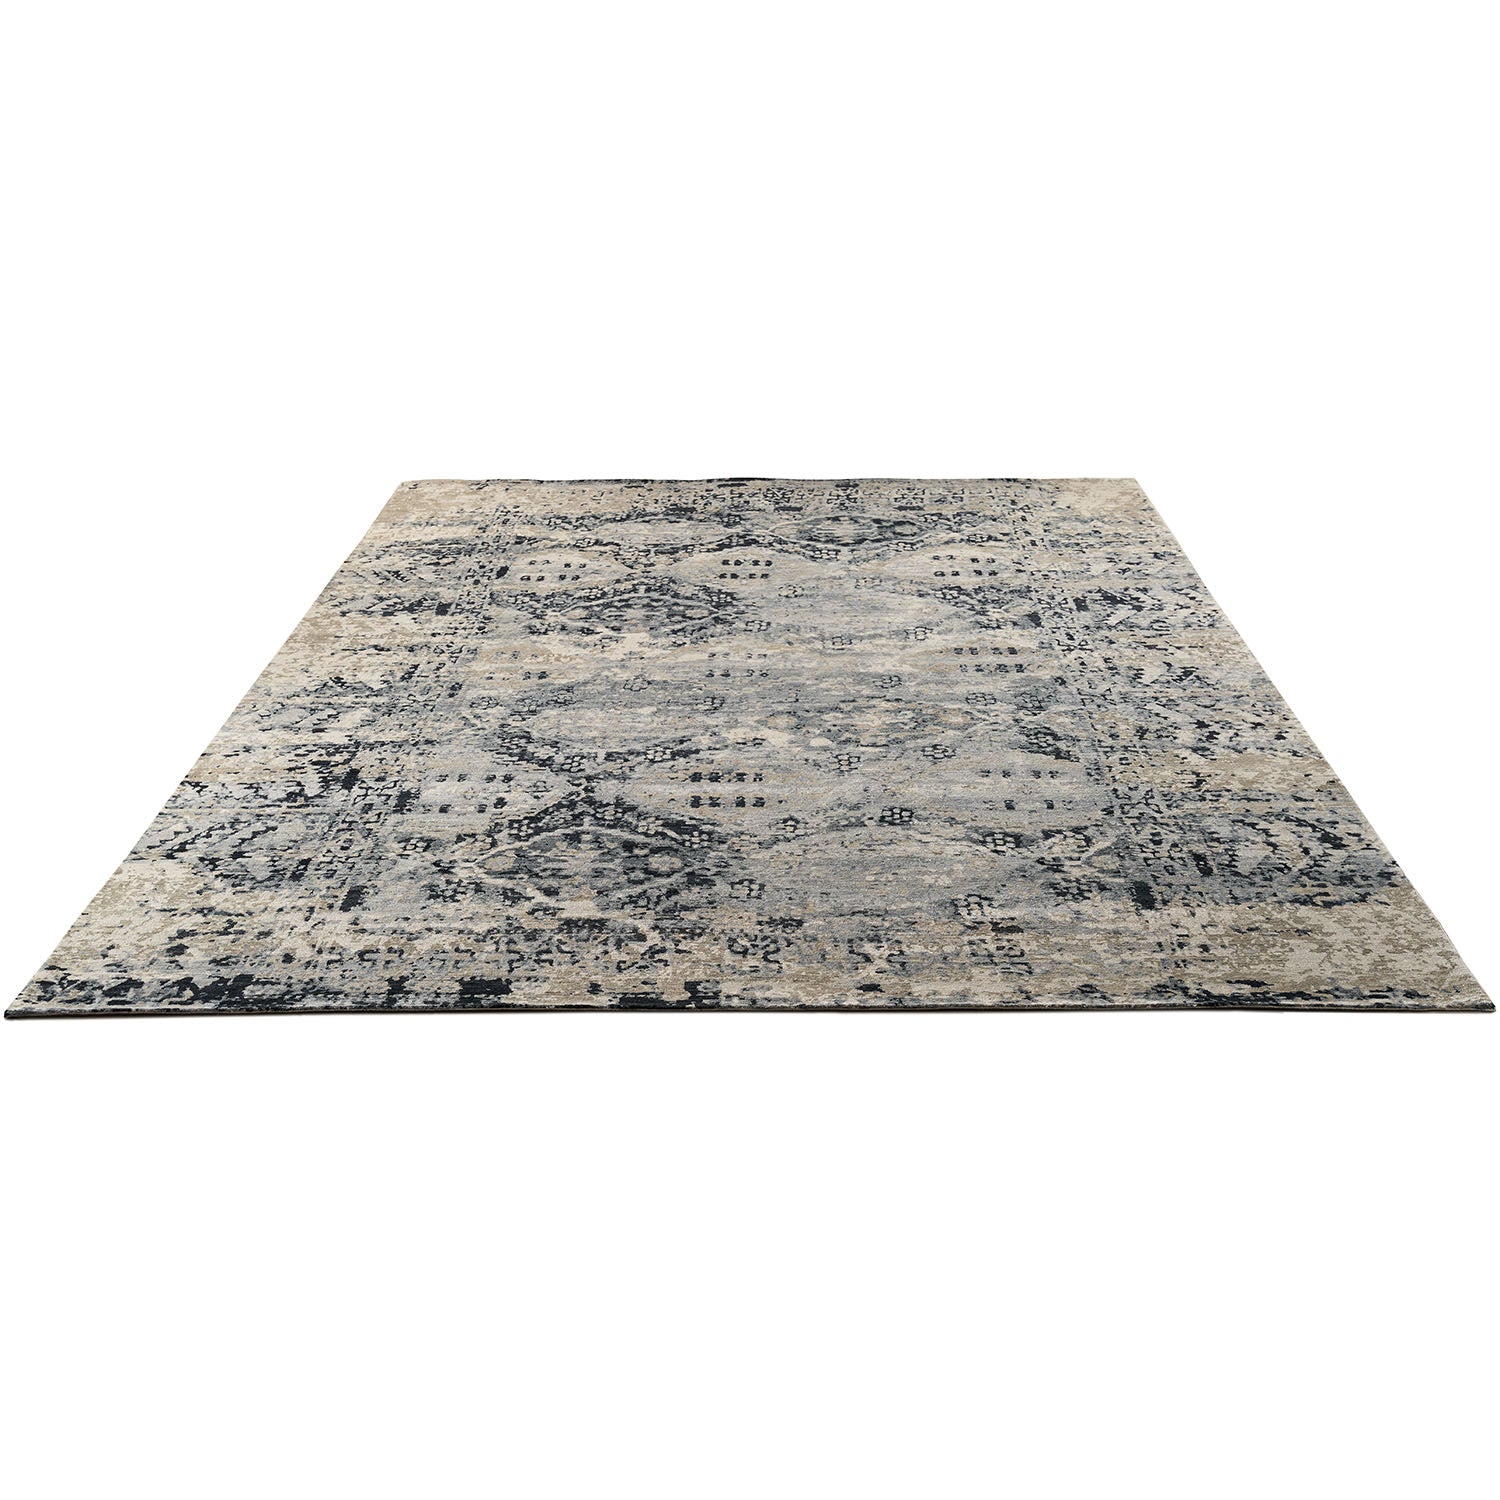 Vintage-inspired rectangular area rug with weathered look and traditional motifs.